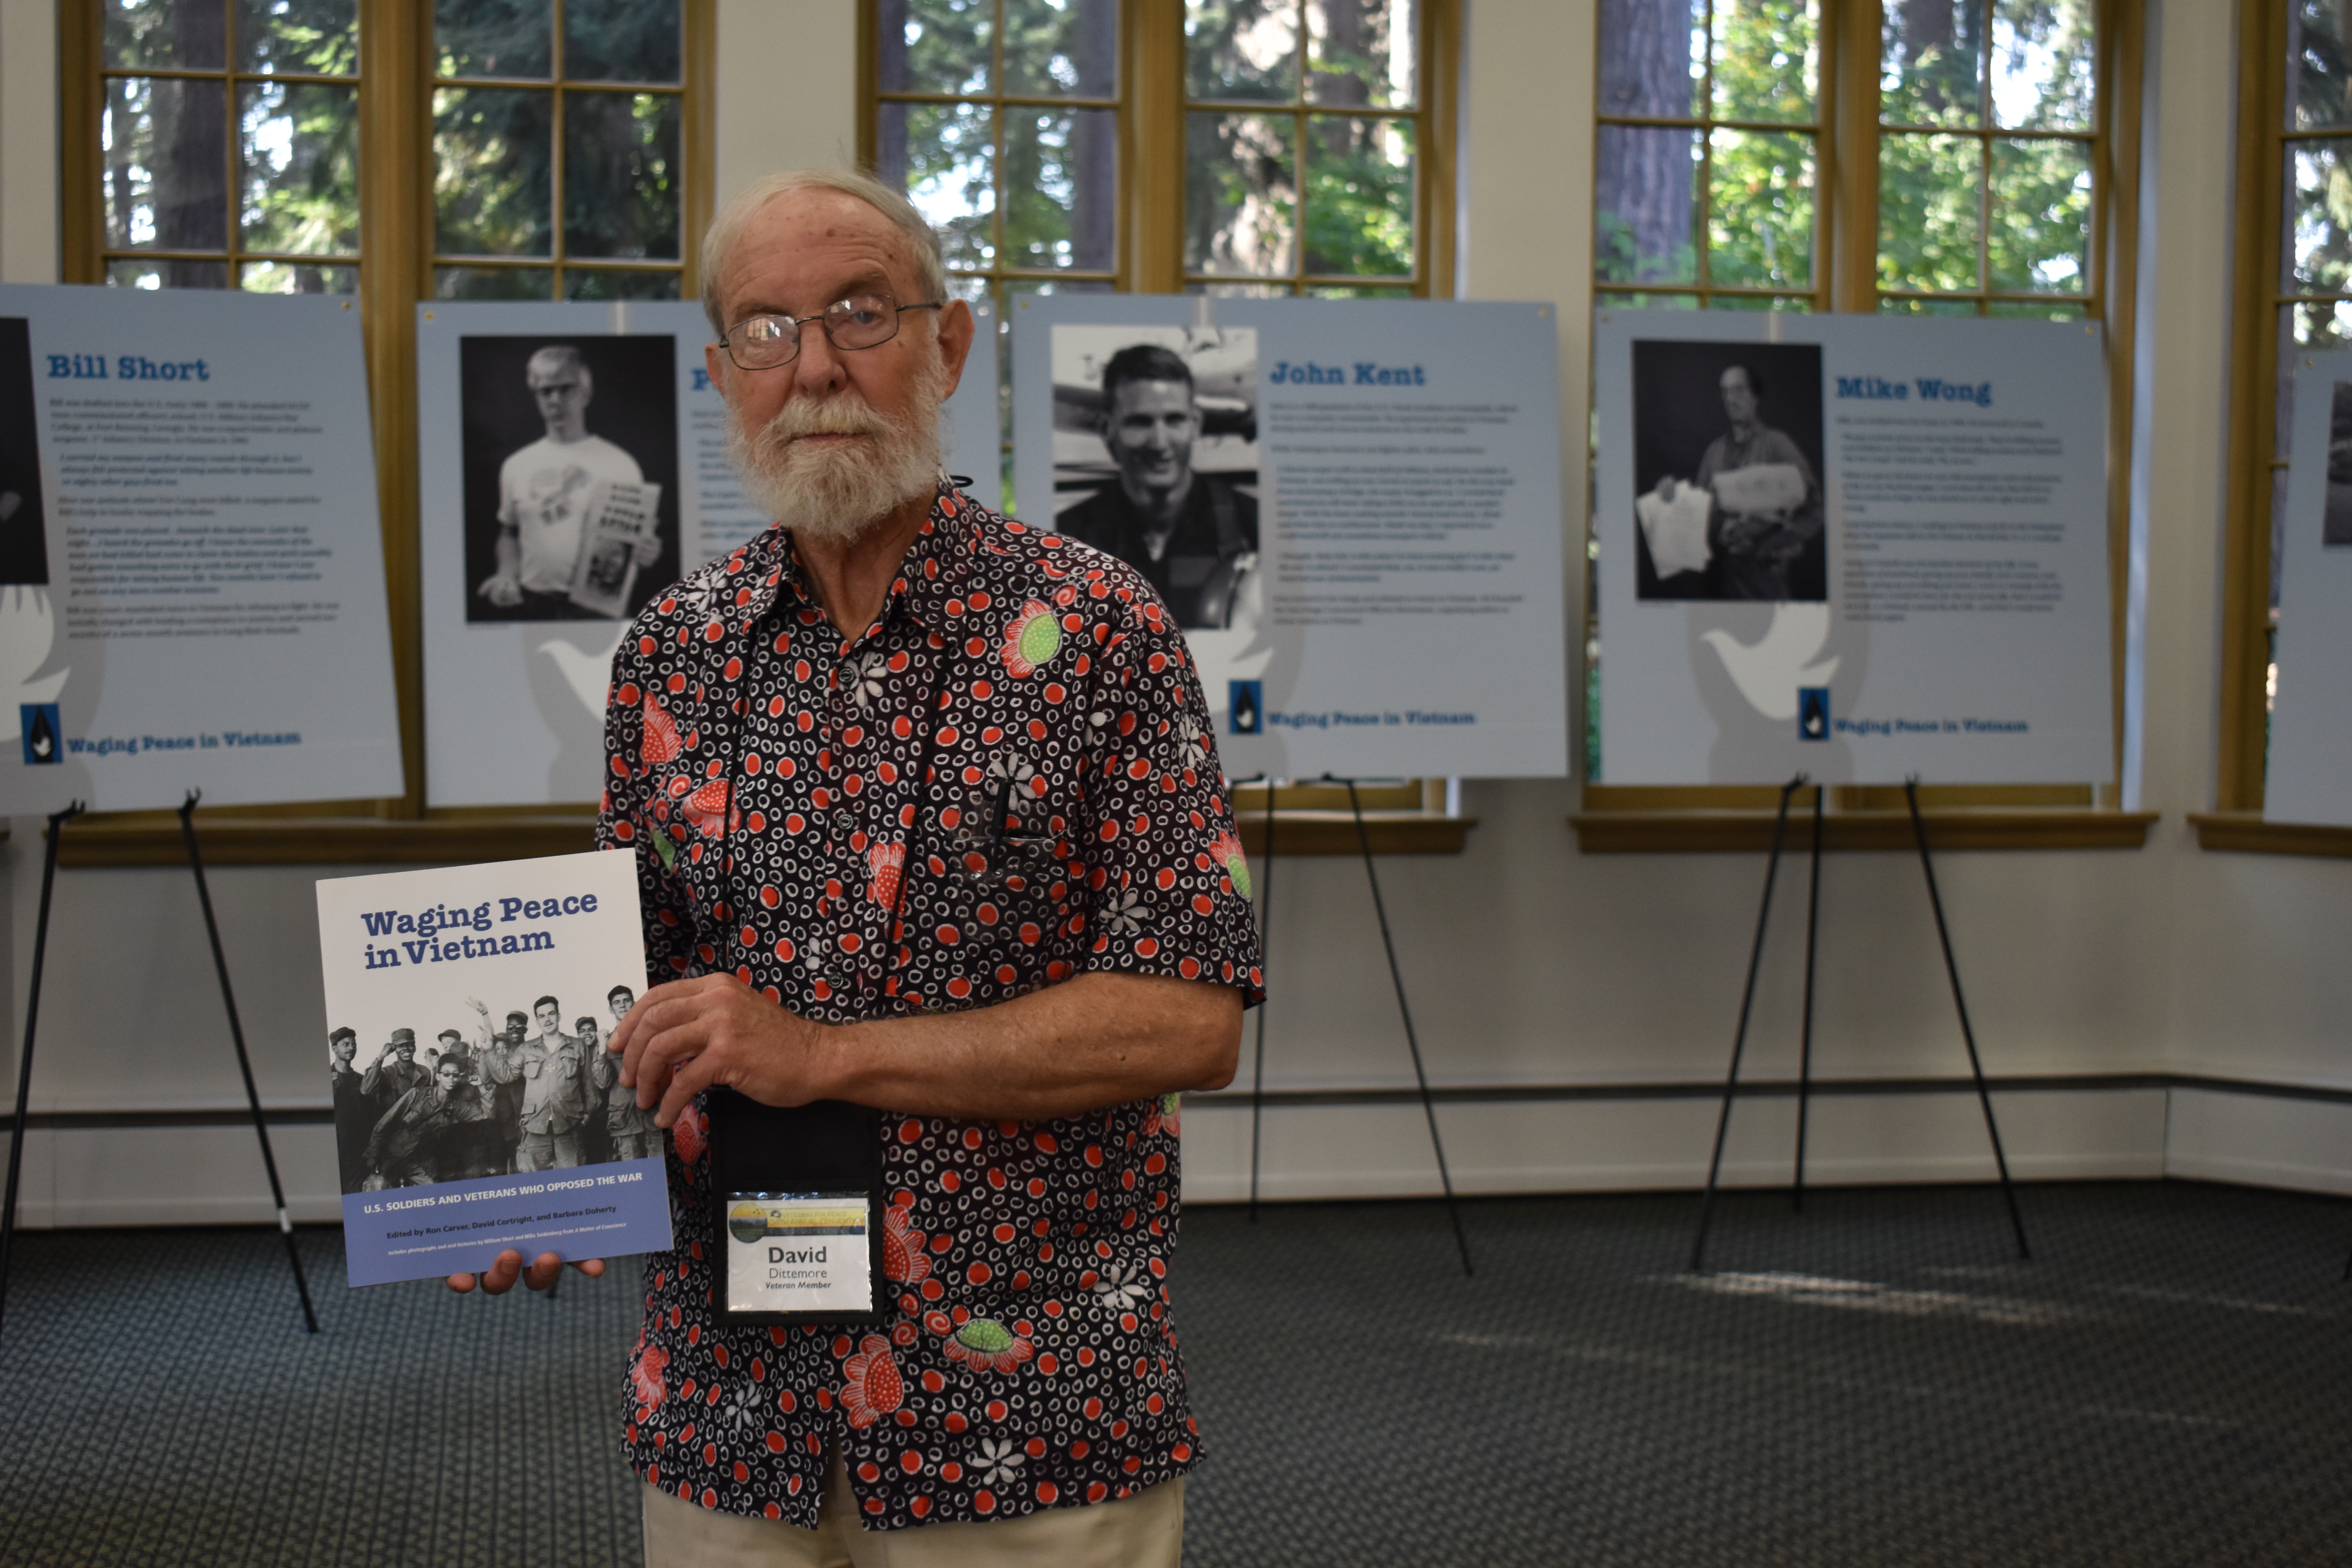 David Dittemore, a veteran of the Vietnam war and member of Veterans for Peace, was at the installation of the exhibit this week. Photo by Lauren Gallup.